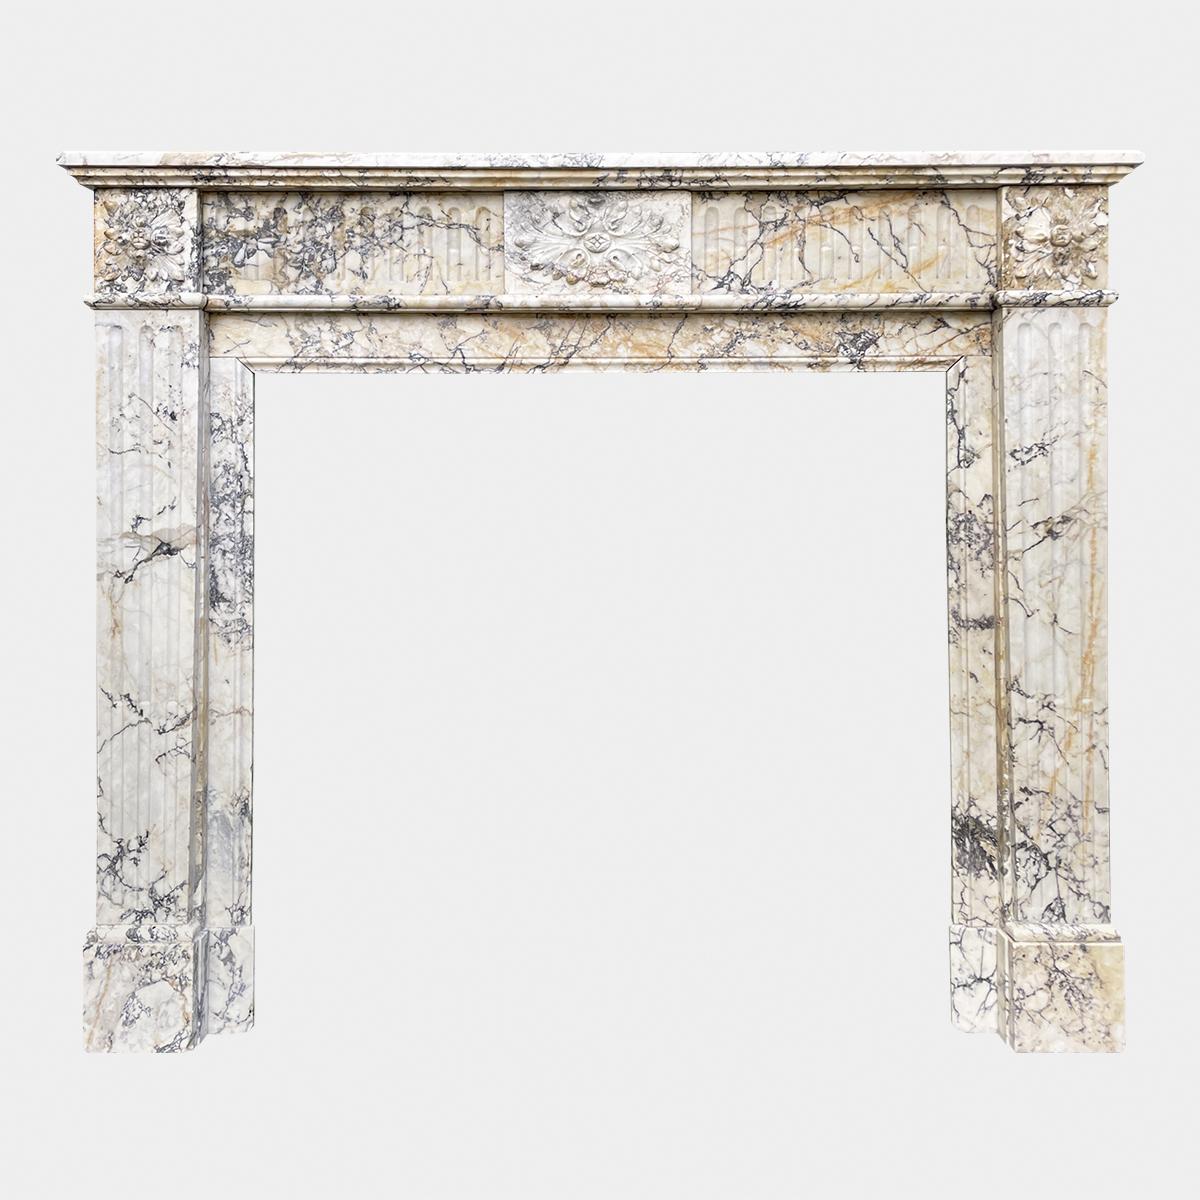 A French antique fireplace in the Louis XVI style carved in Italian Seravezza Marble. The fluted jambs with deep side returns and inner slips, terminating in square carved Patarae corner blocks. The frieze of conforming design with fluted panels